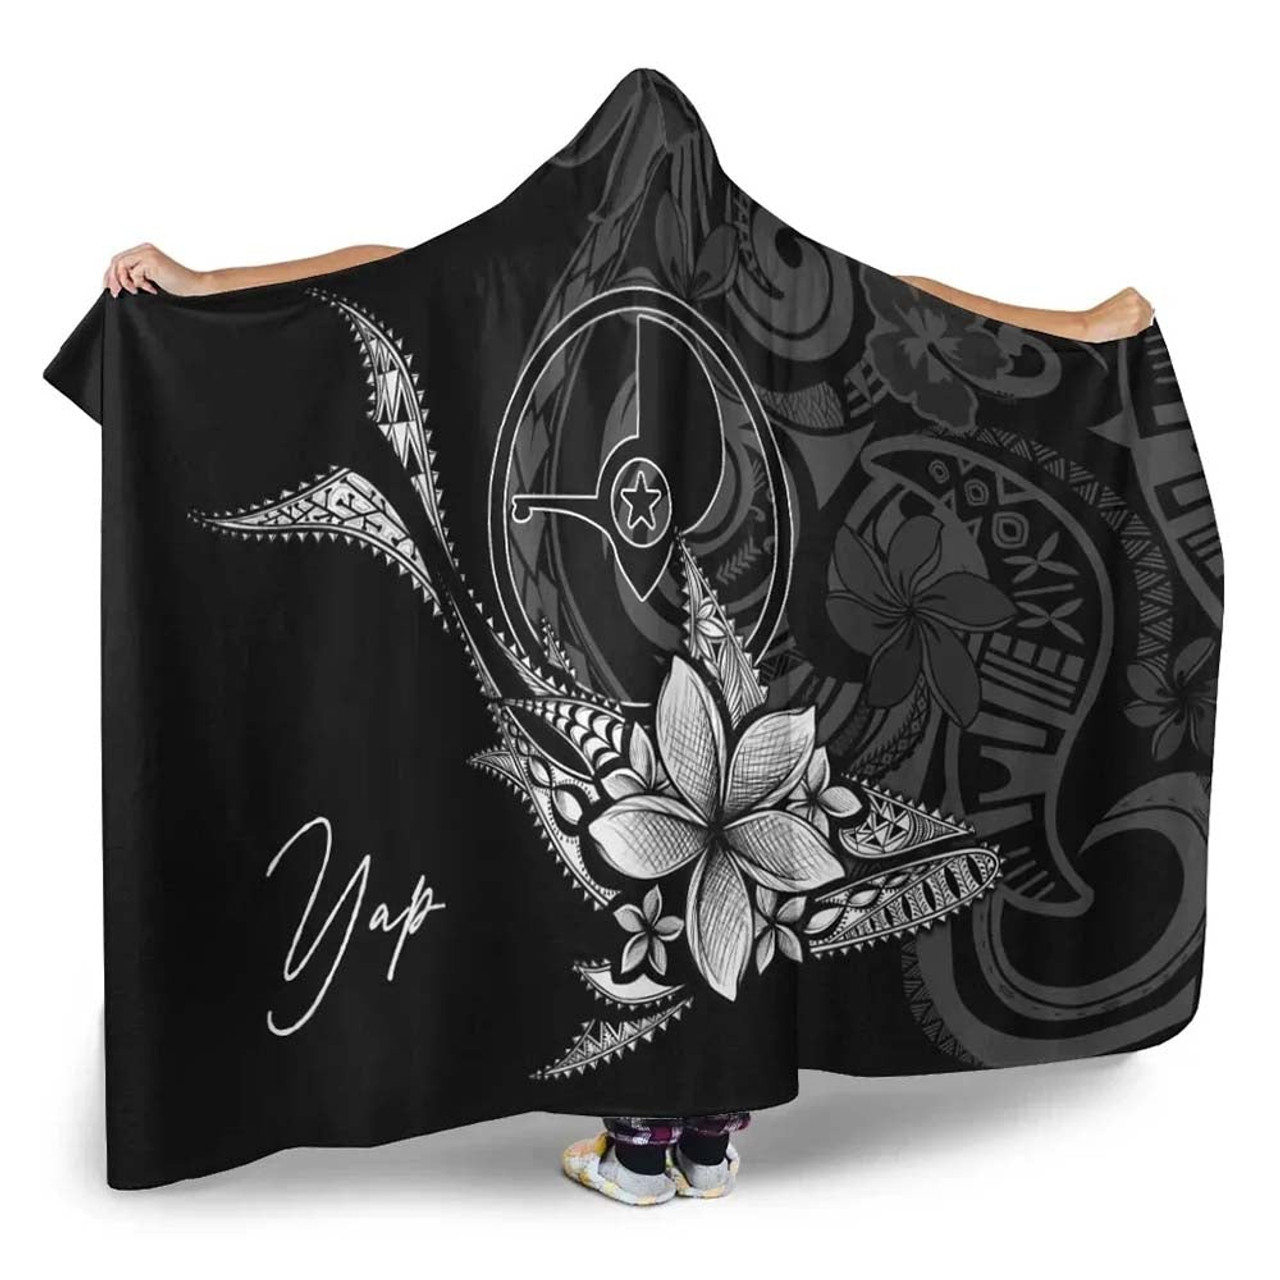 Yap State Hooded Blanket - Fish With Plumeria Flowers Style 2